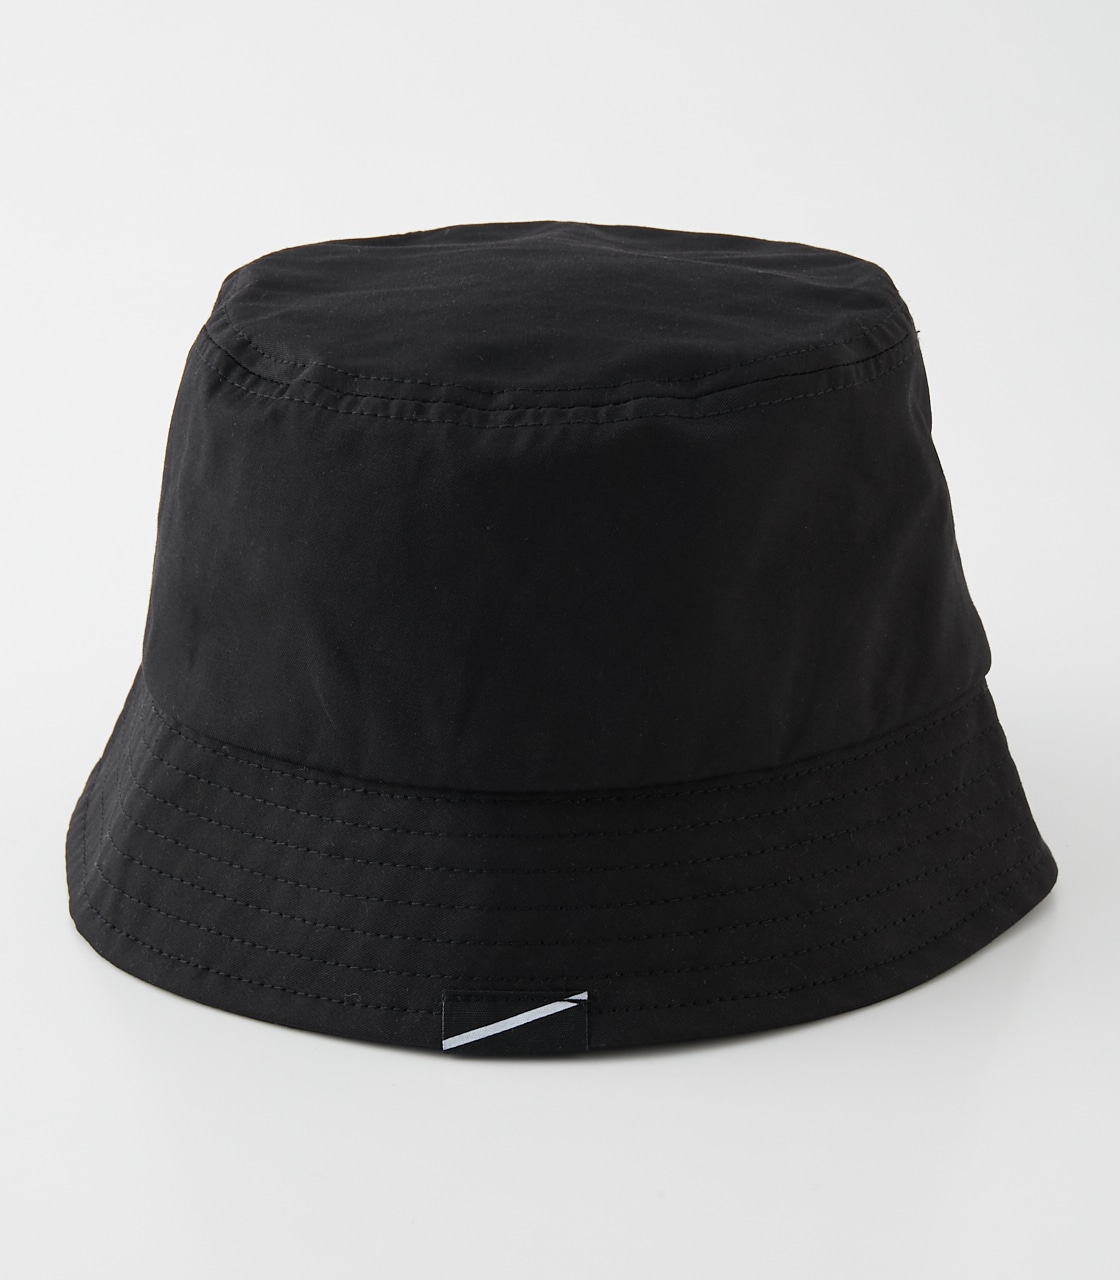 COMPACT DEEPLY BUCKET HAT/コンパクトディープリーバケットハット 詳細画像 BLK 2